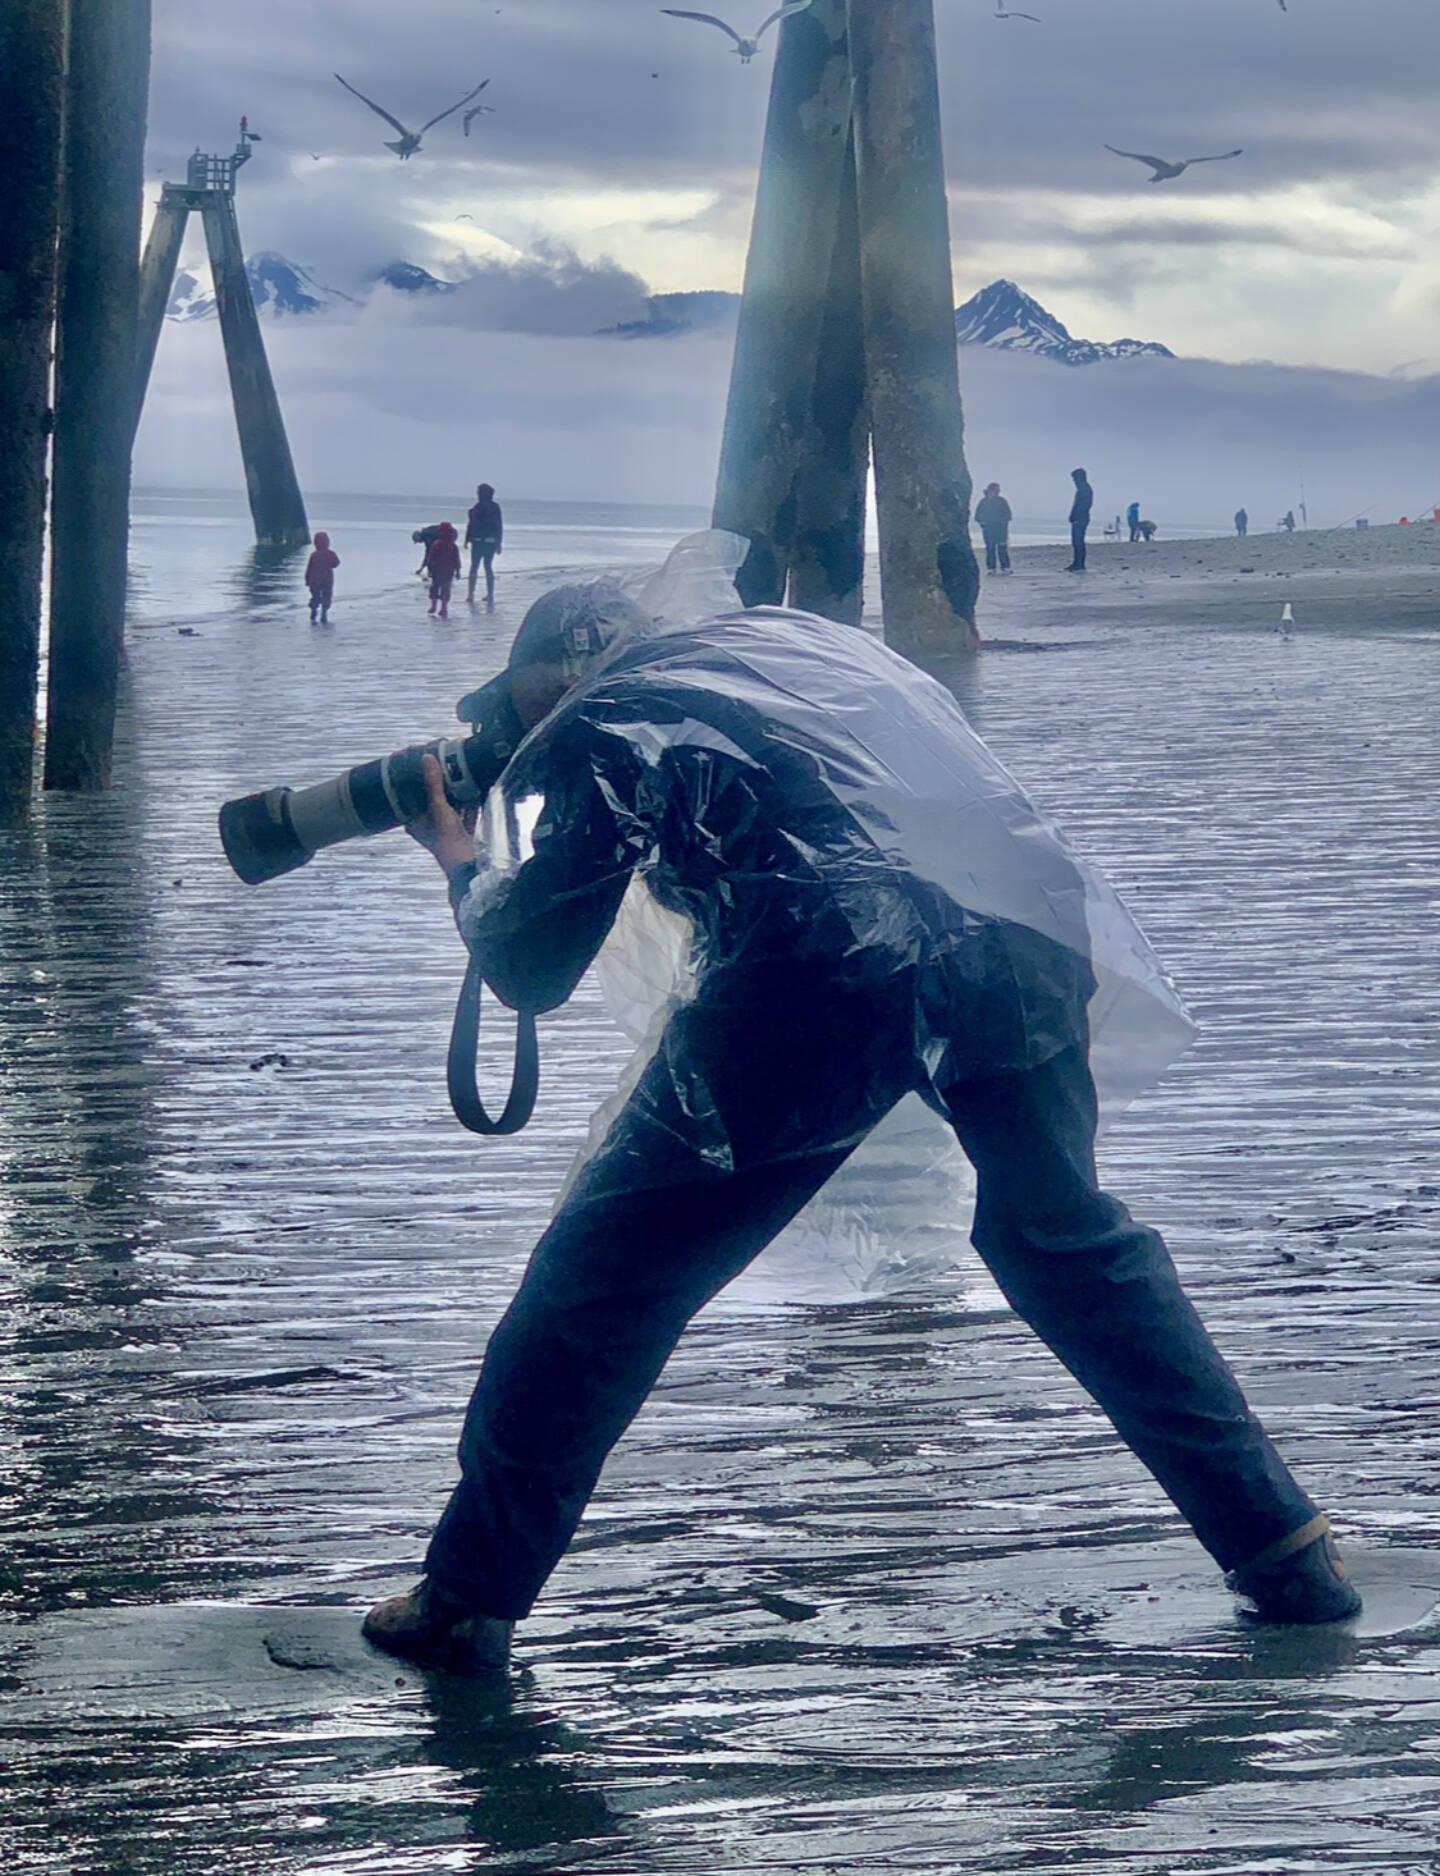 A visitor from Minnesota photographs seastars at the beach by Land’s End Resort during a moderately low tide on Tuesday, June 20, 2023 in Homer, Alaska. Photo by Christina Whiting